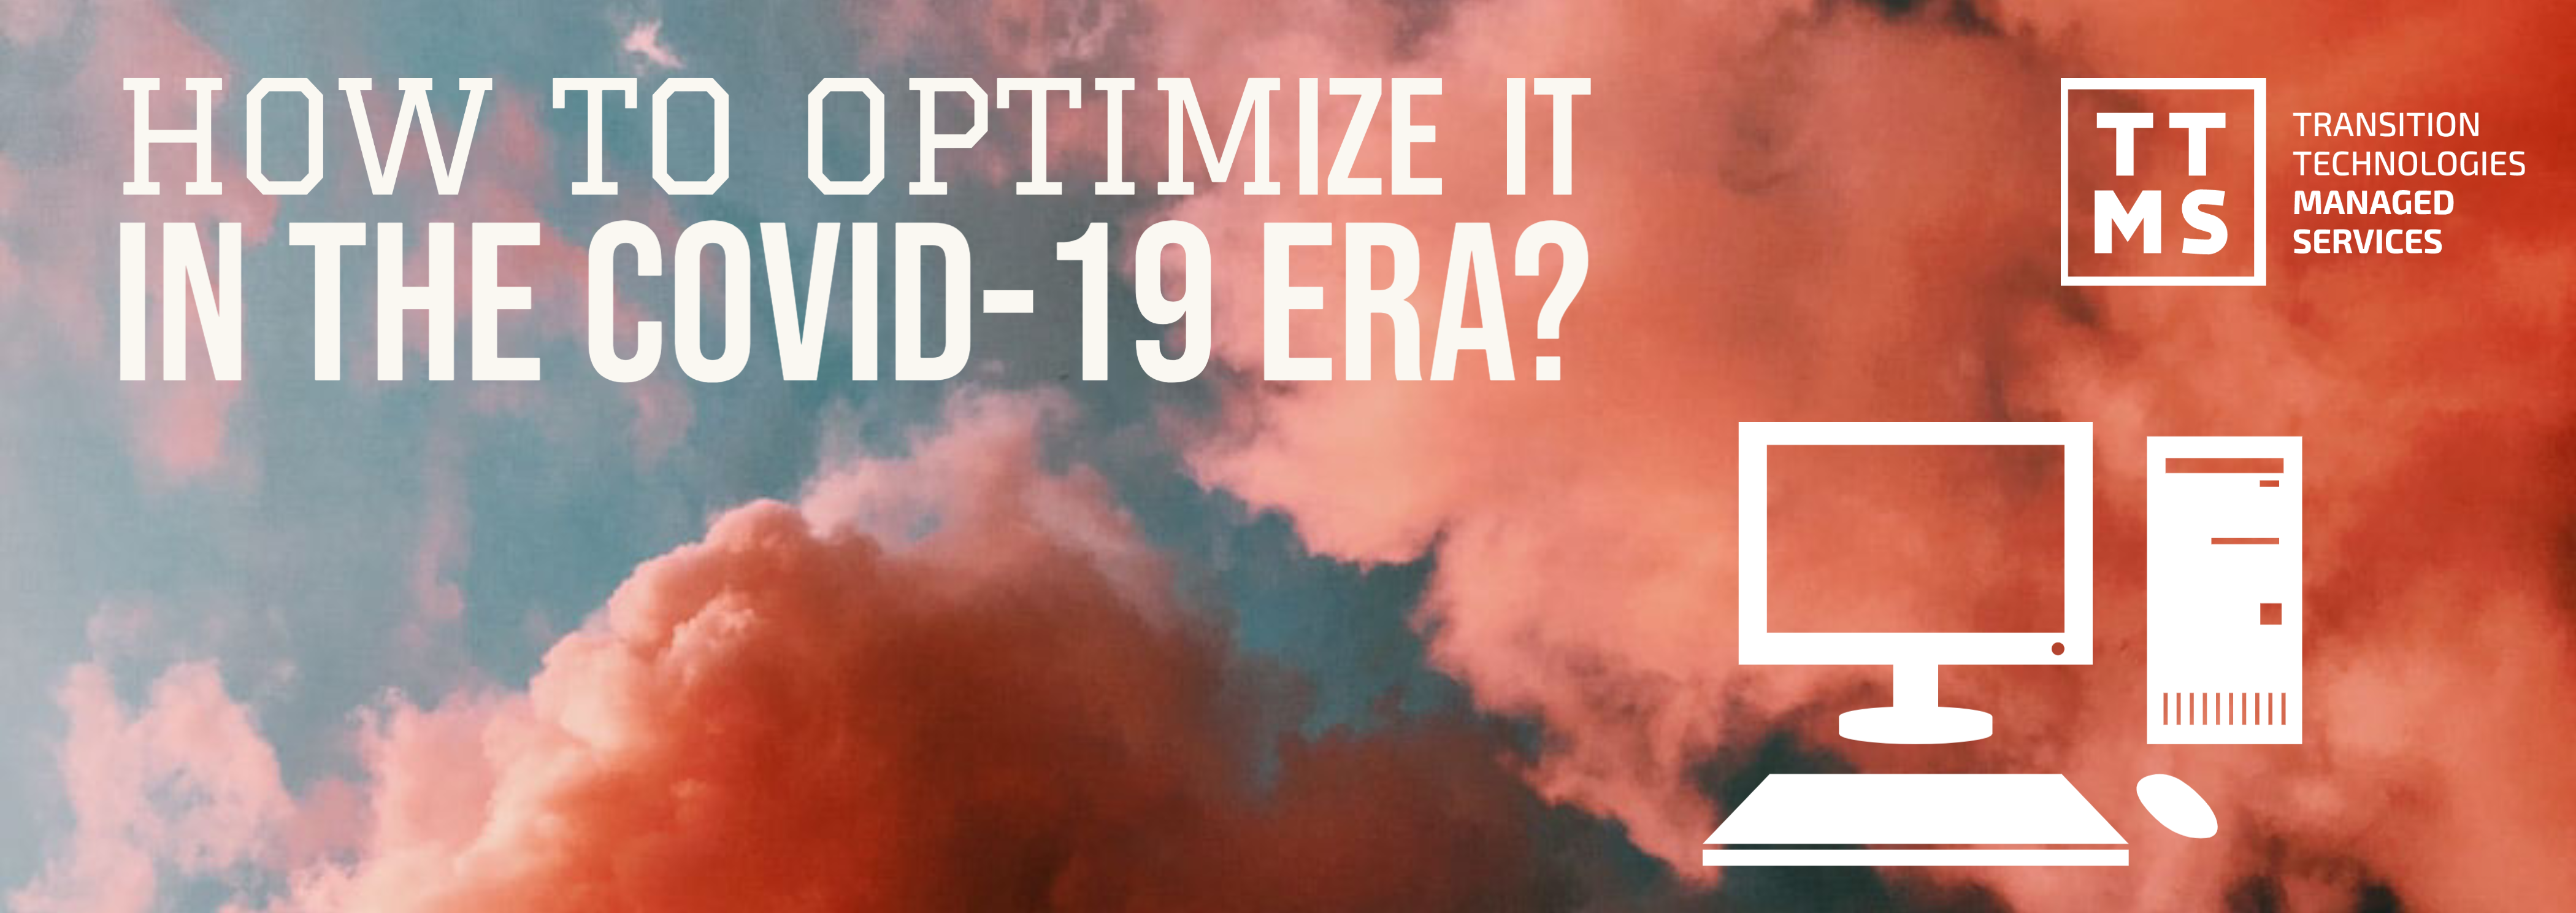 How to optimize IT in the COVID-19 era? – analysis